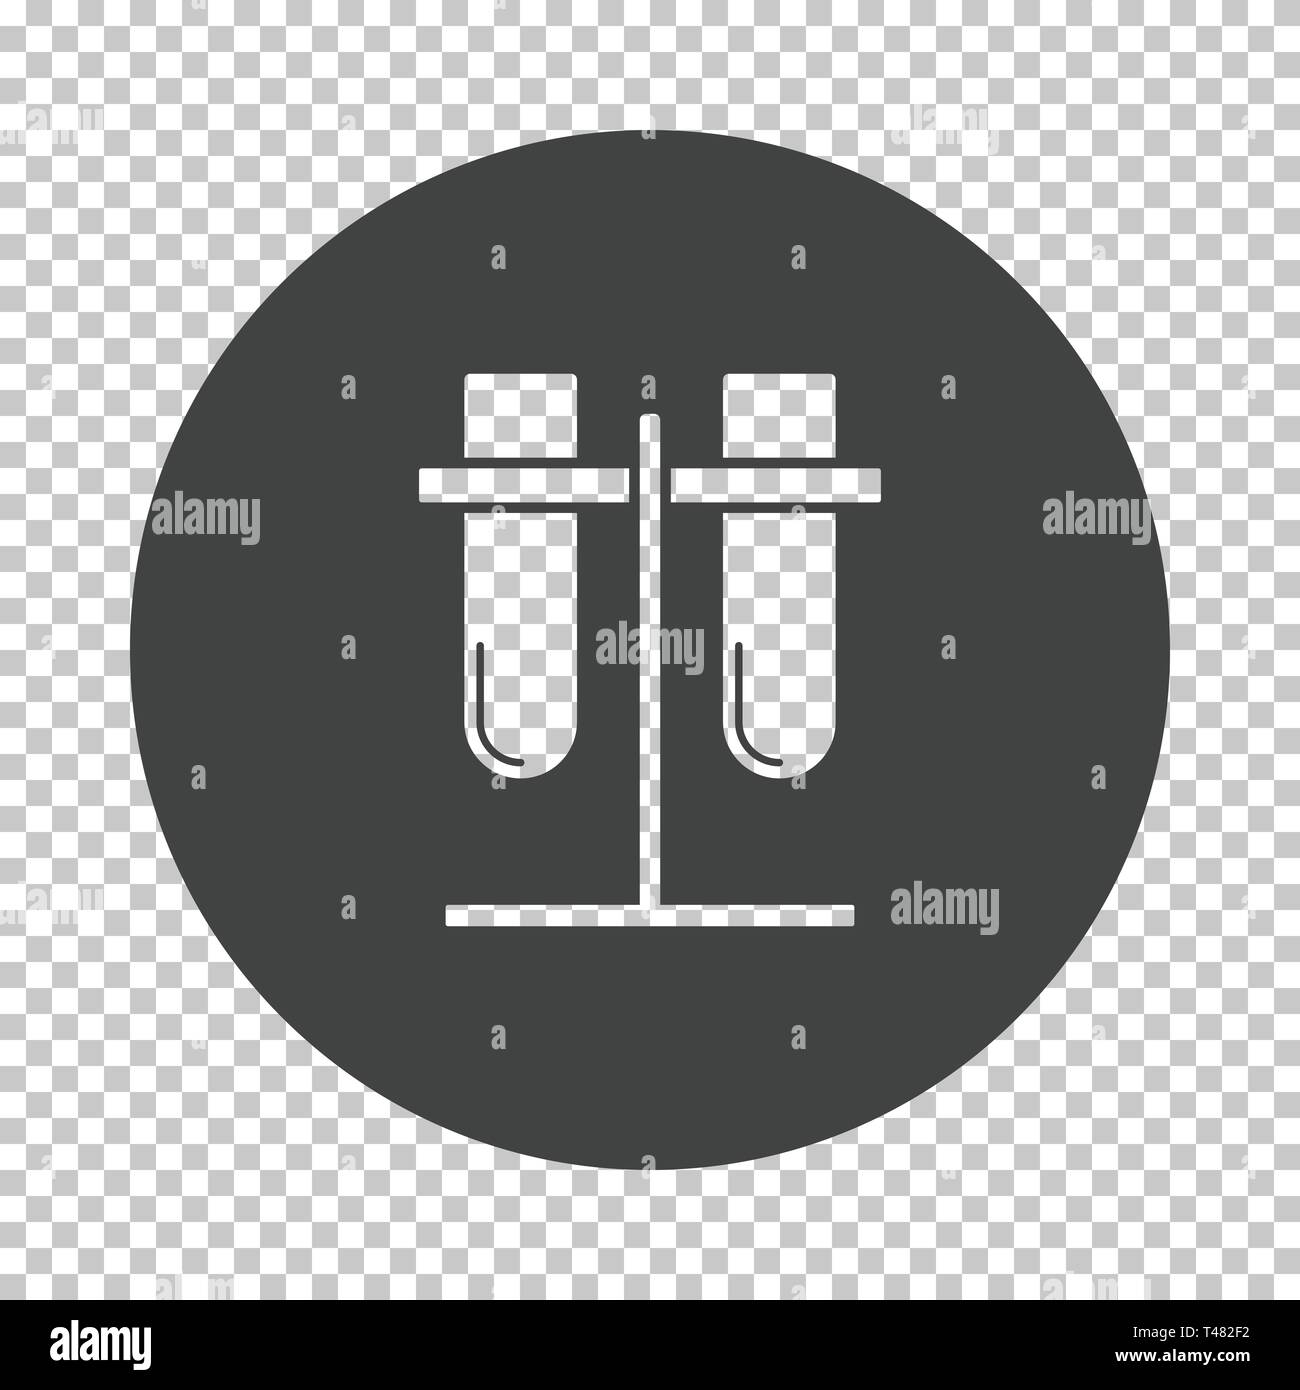 Lab flasks attached to stand icon. Subtract stencil design on tranparency grid. Vector illustration. Stock Vector